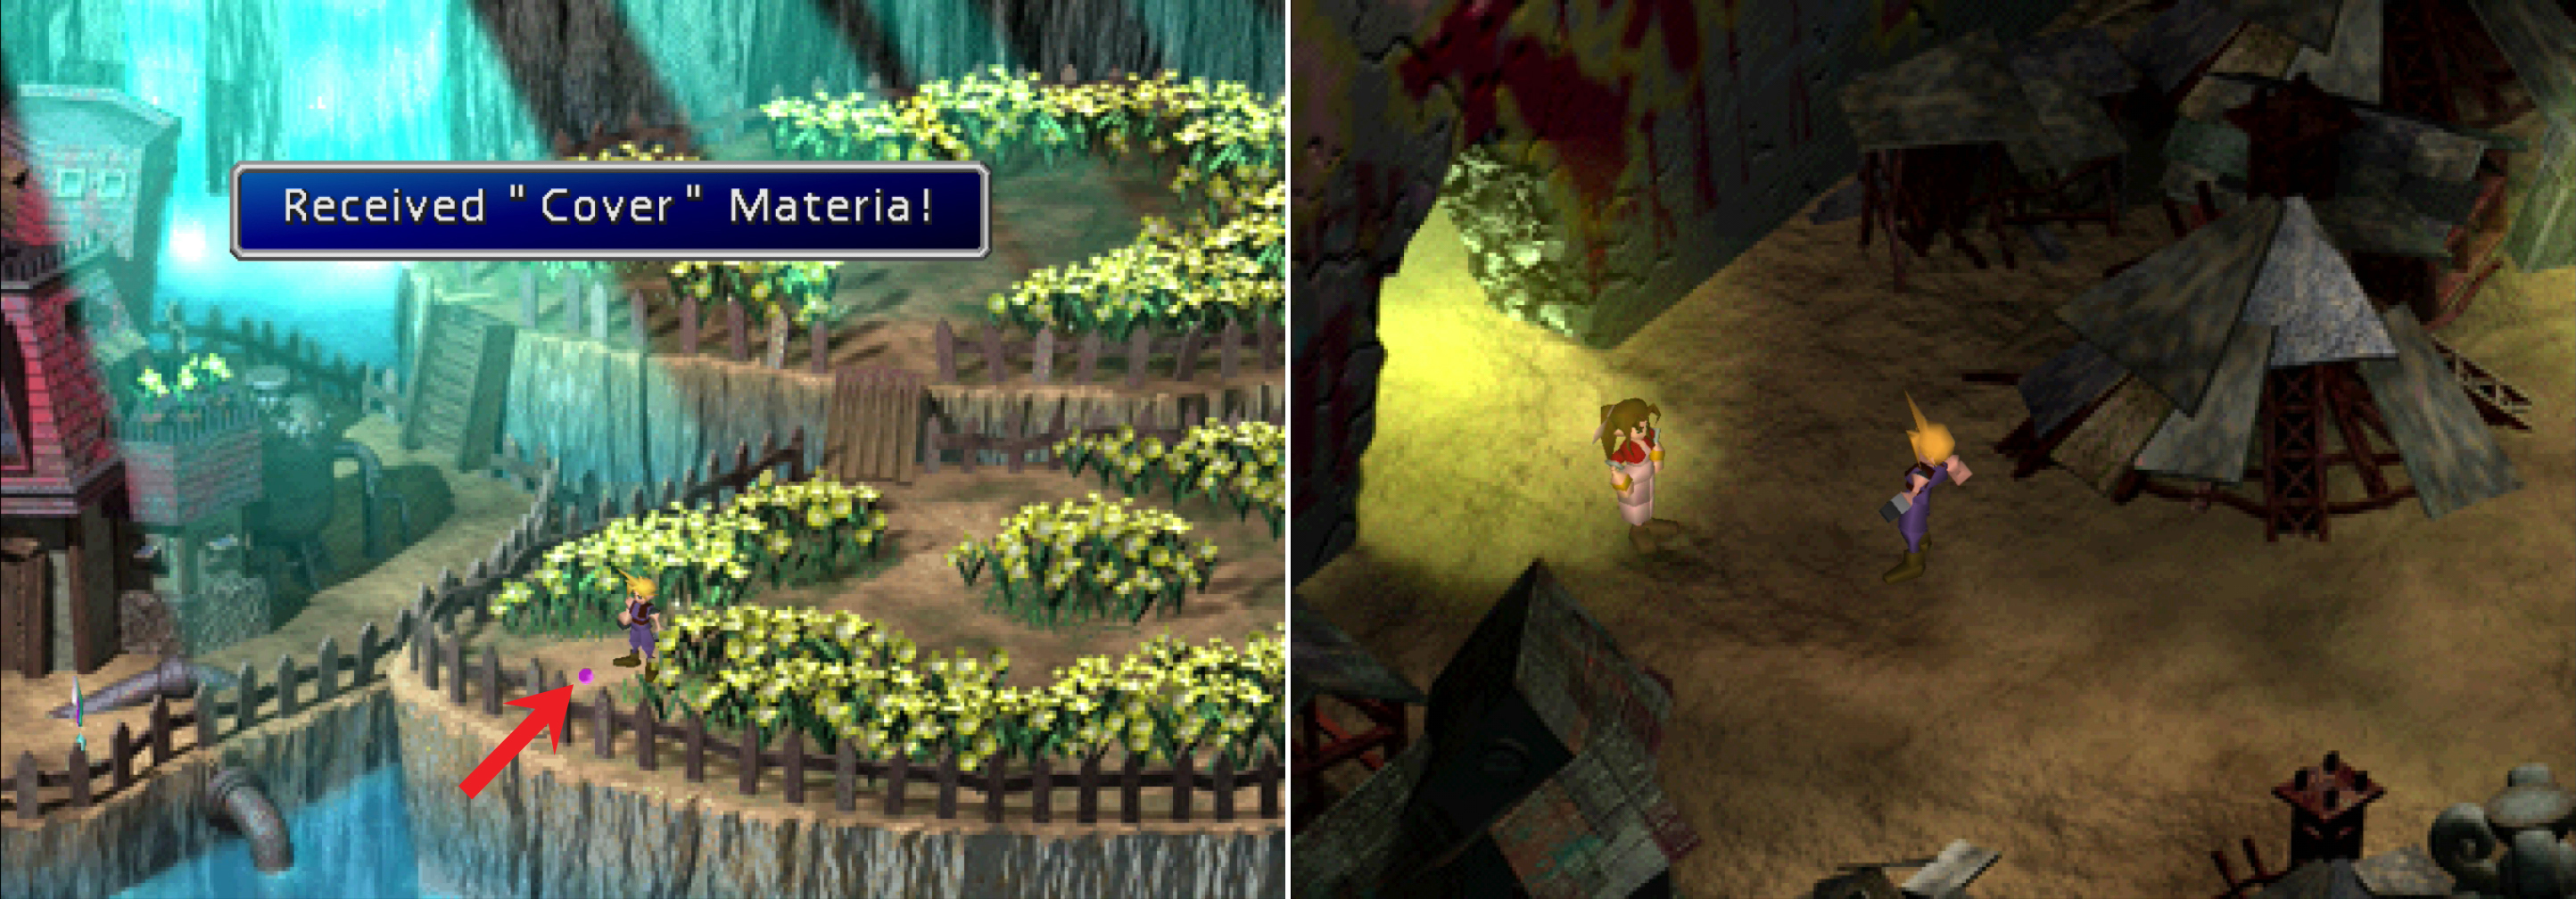 Pick up the Cover Materia in Aeris's garden (left) then do your best to sneak to Sector 6 without rousing Aeris… (right).